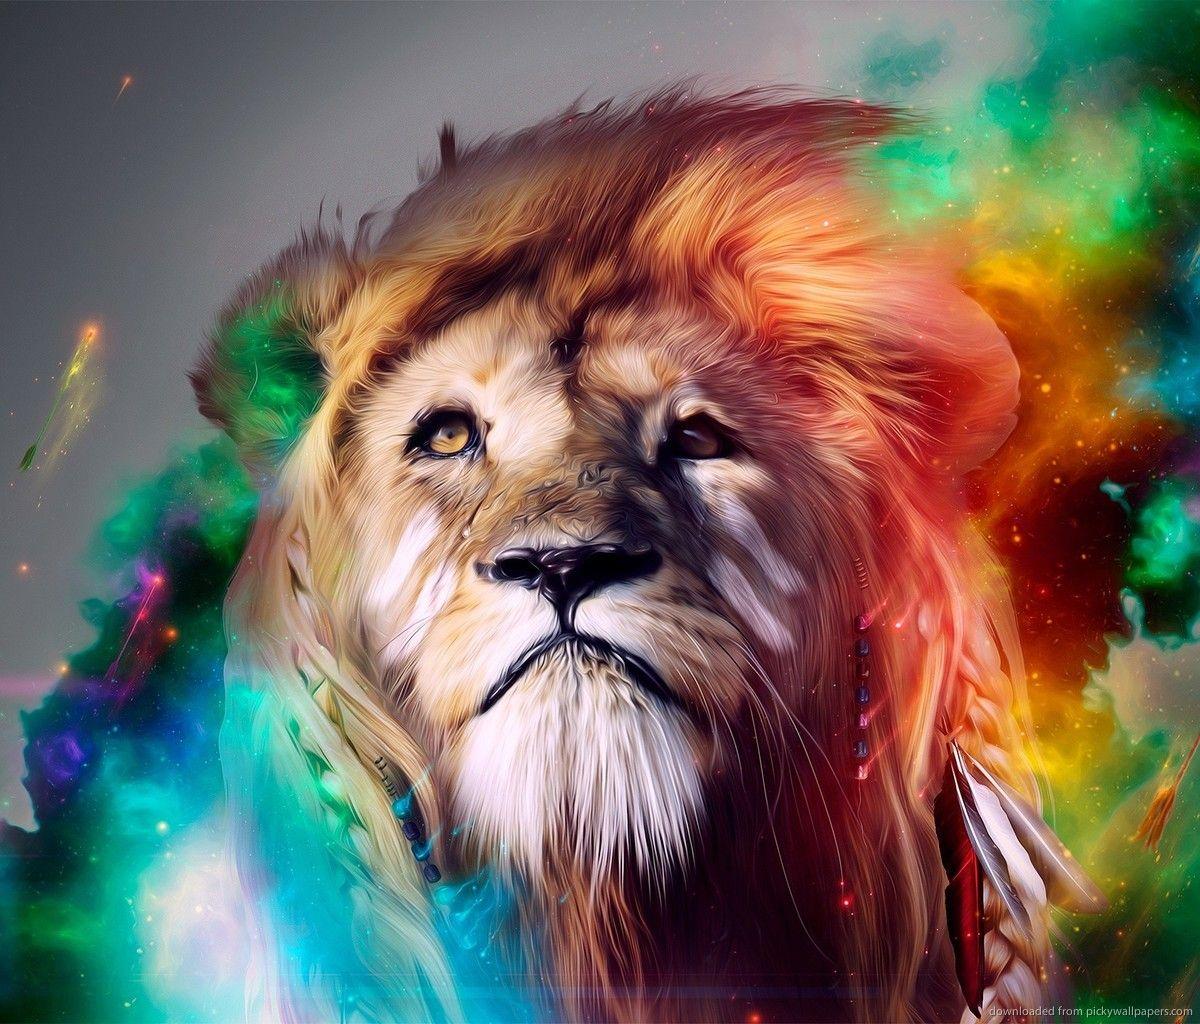 Lion Galaxy Wallpapers Top Free Lion Galaxy Backgrounds